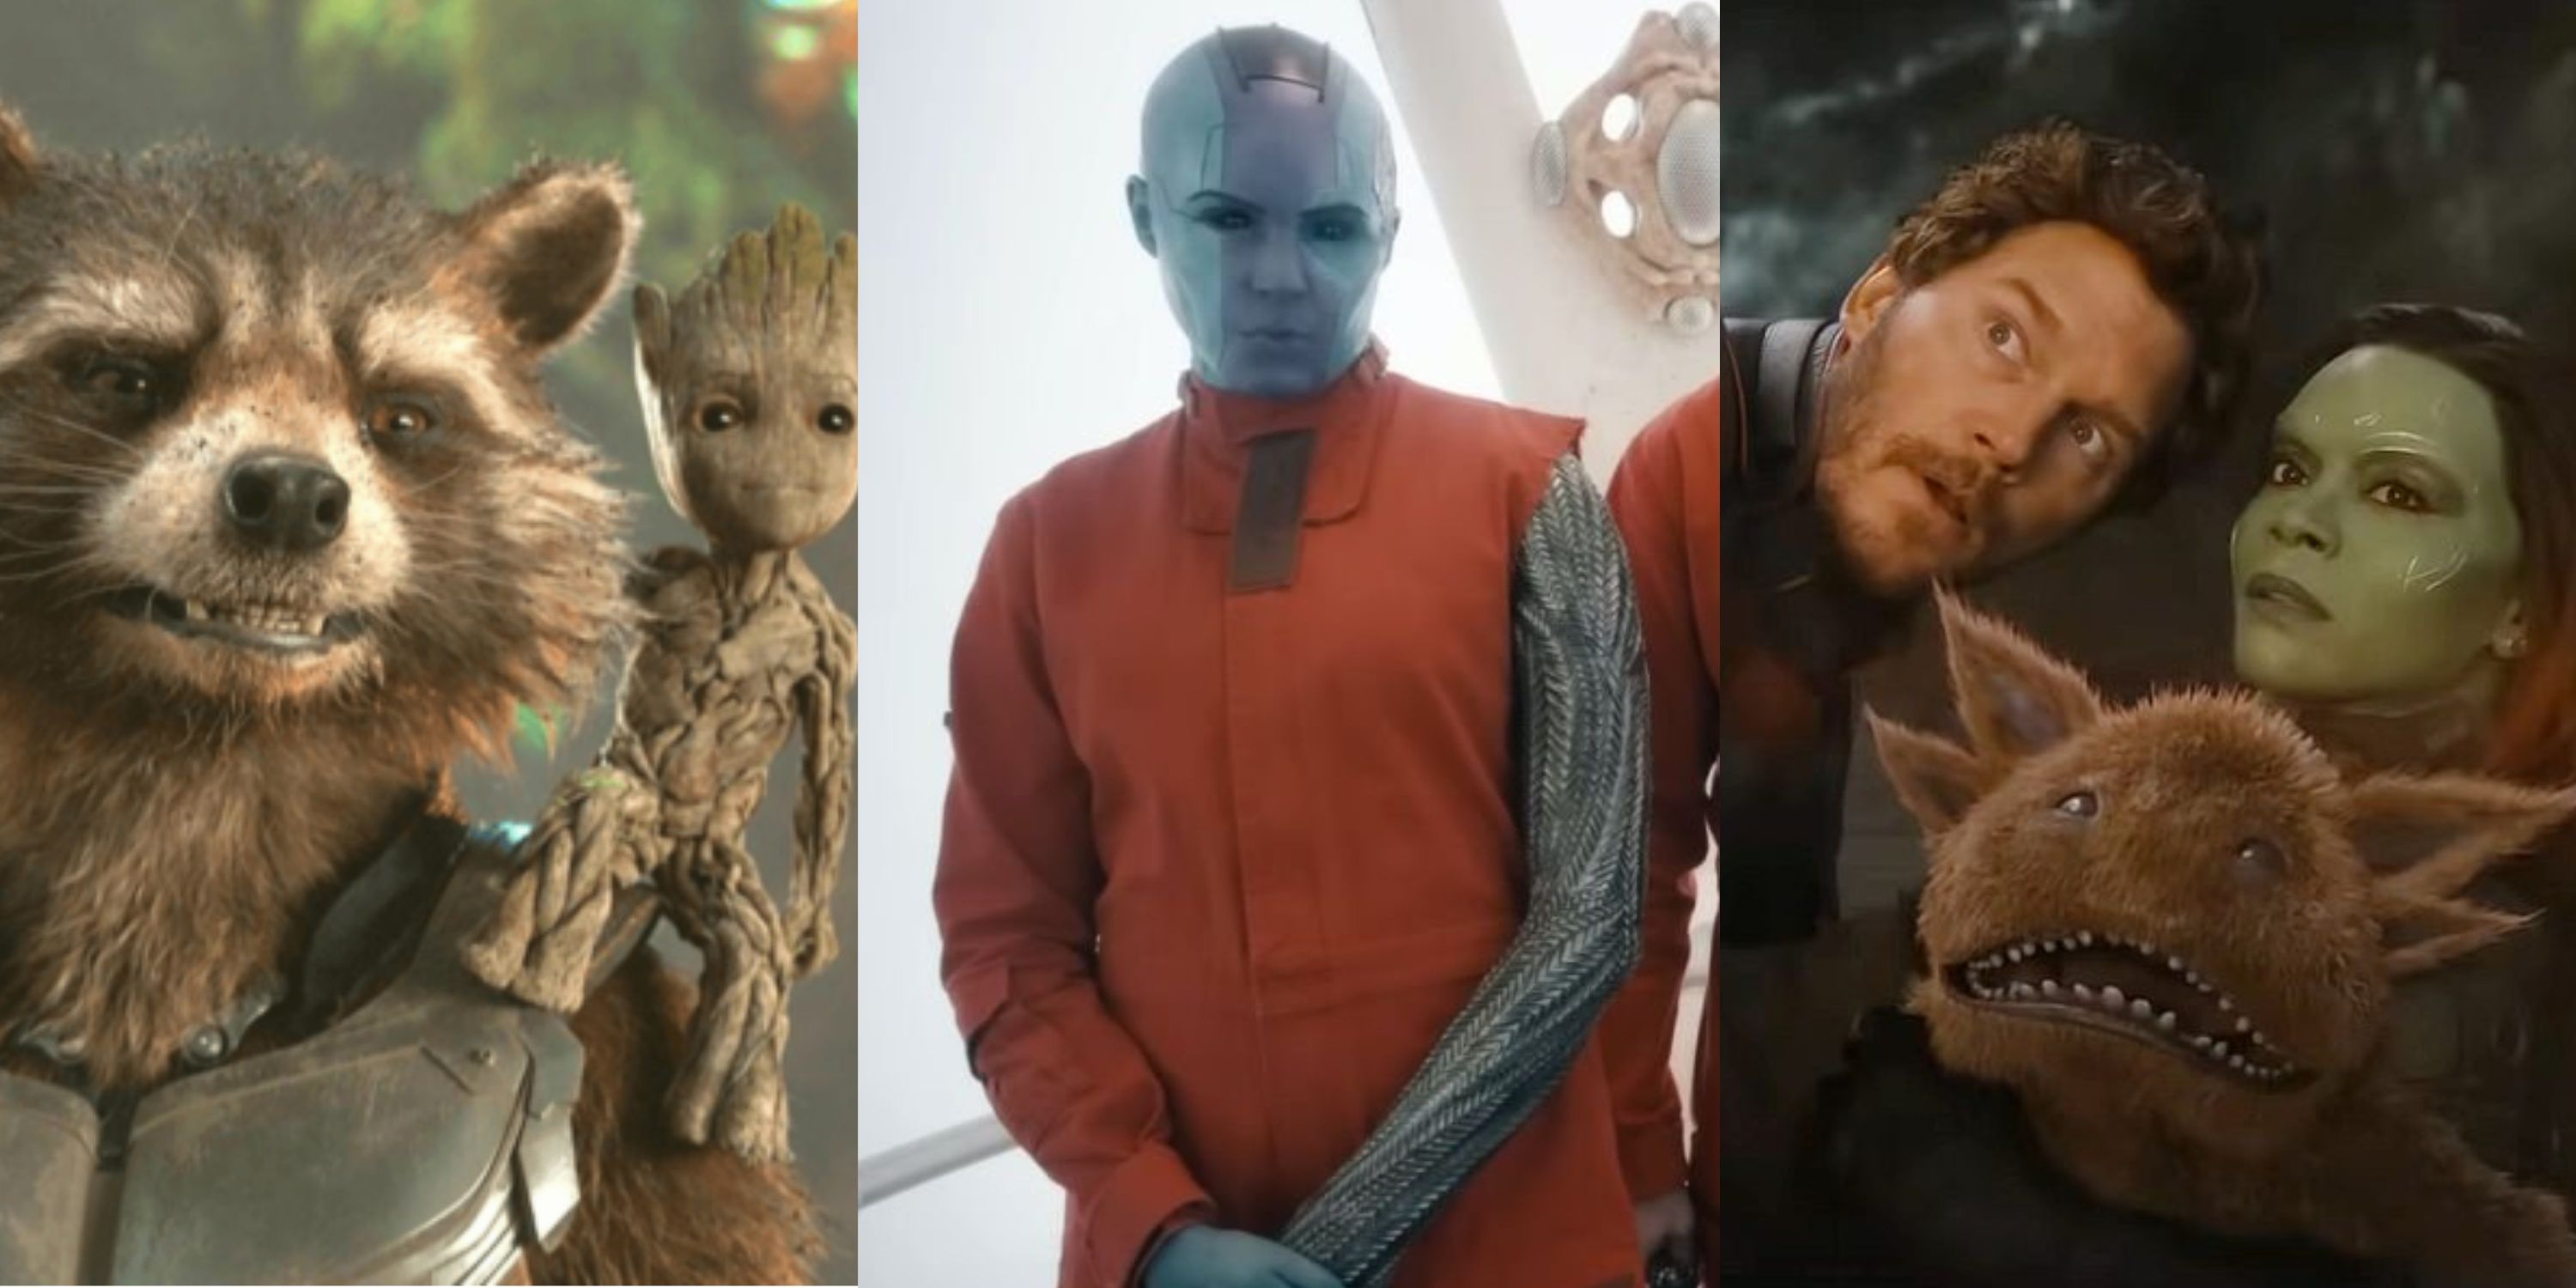 Baby Groot on Rocket's shoulder, Nebula dressed as inmate, and Peter & Gamora with a puppet in GotG